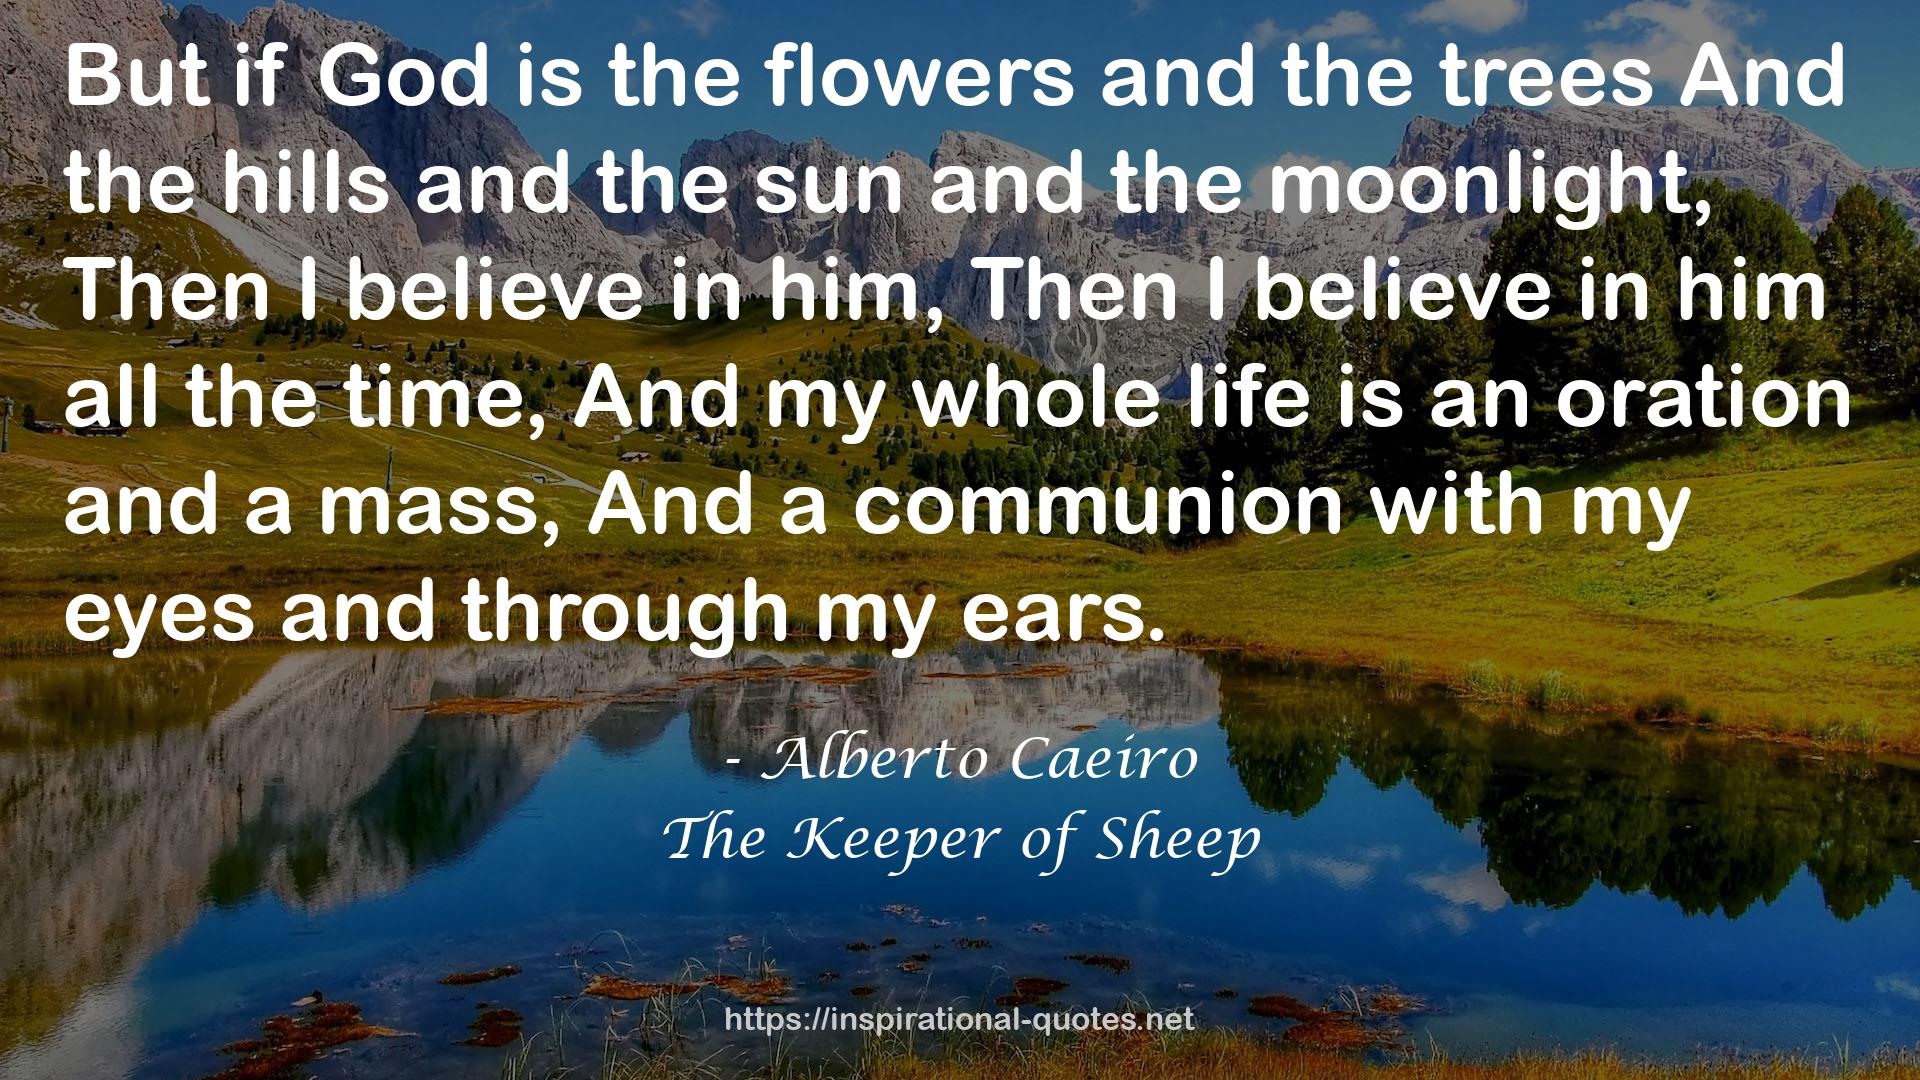 The Keeper of Sheep QUOTES